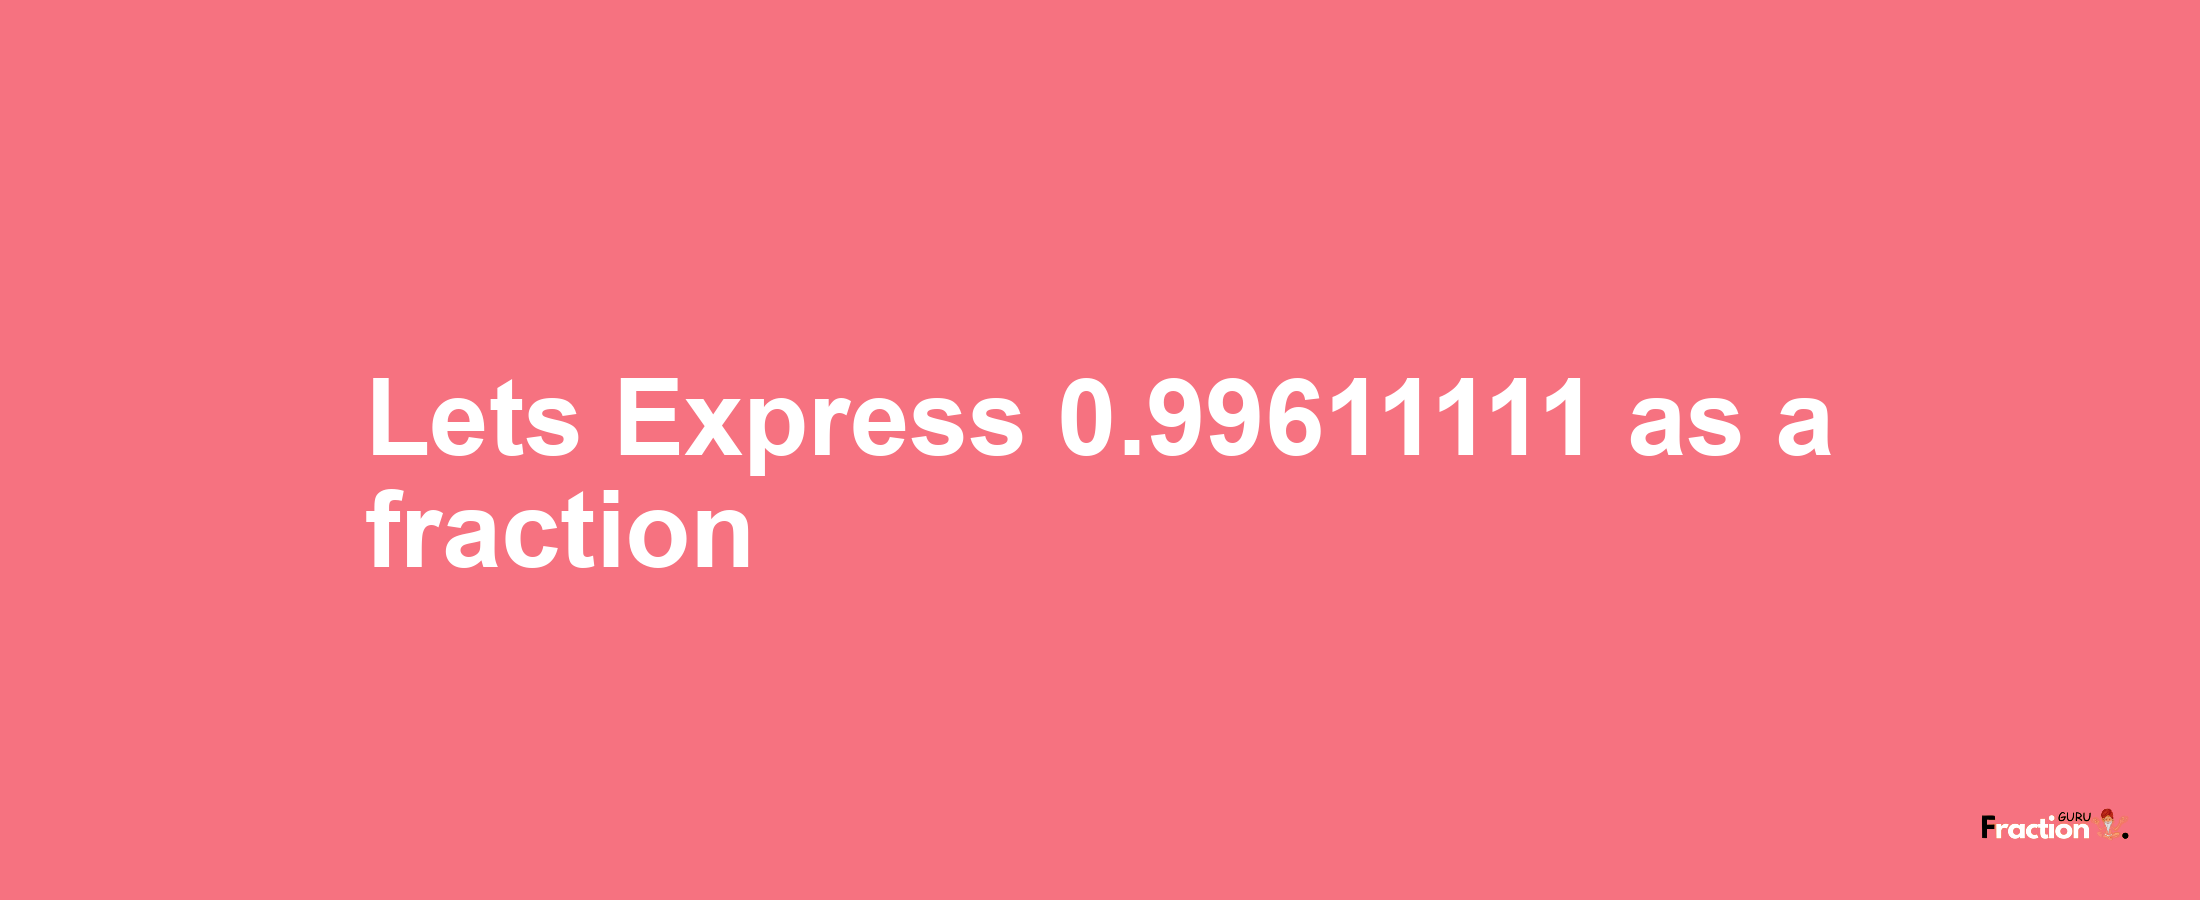 Lets Express 0.99611111 as afraction